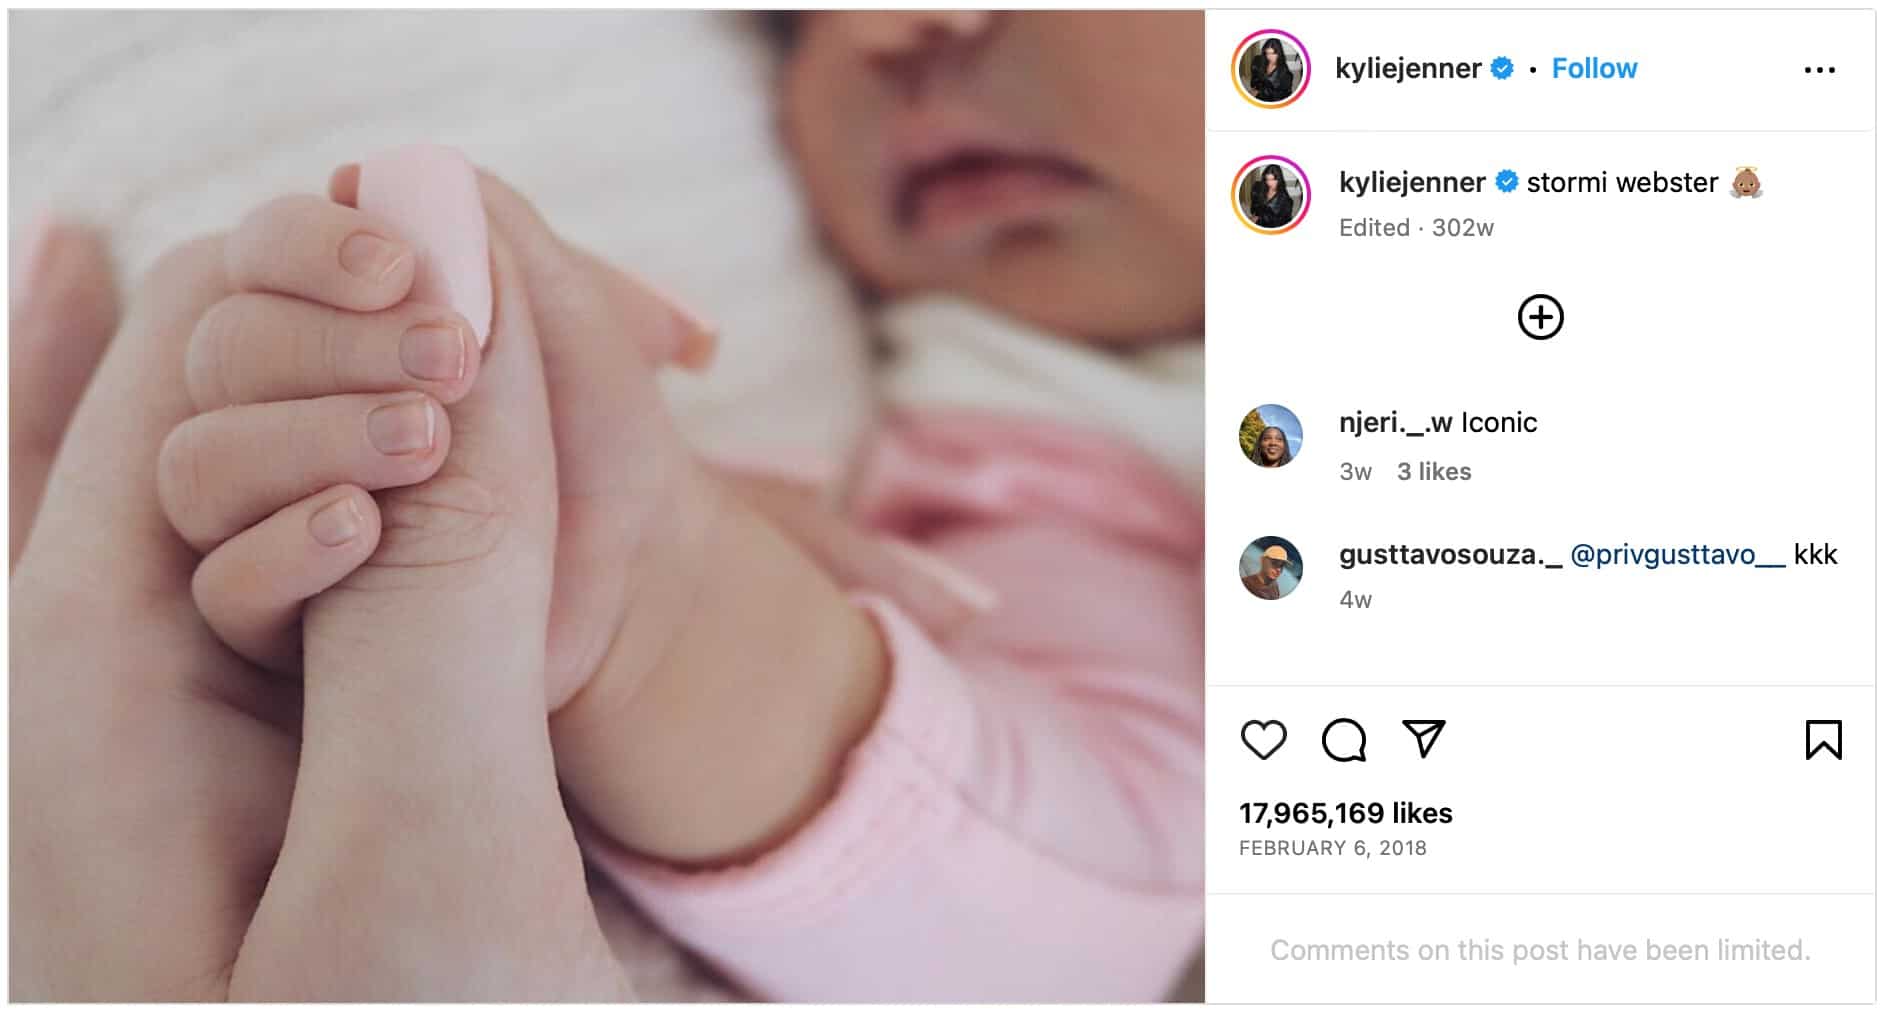 Kylie Jenner's photo of her firstborn's little fingers.